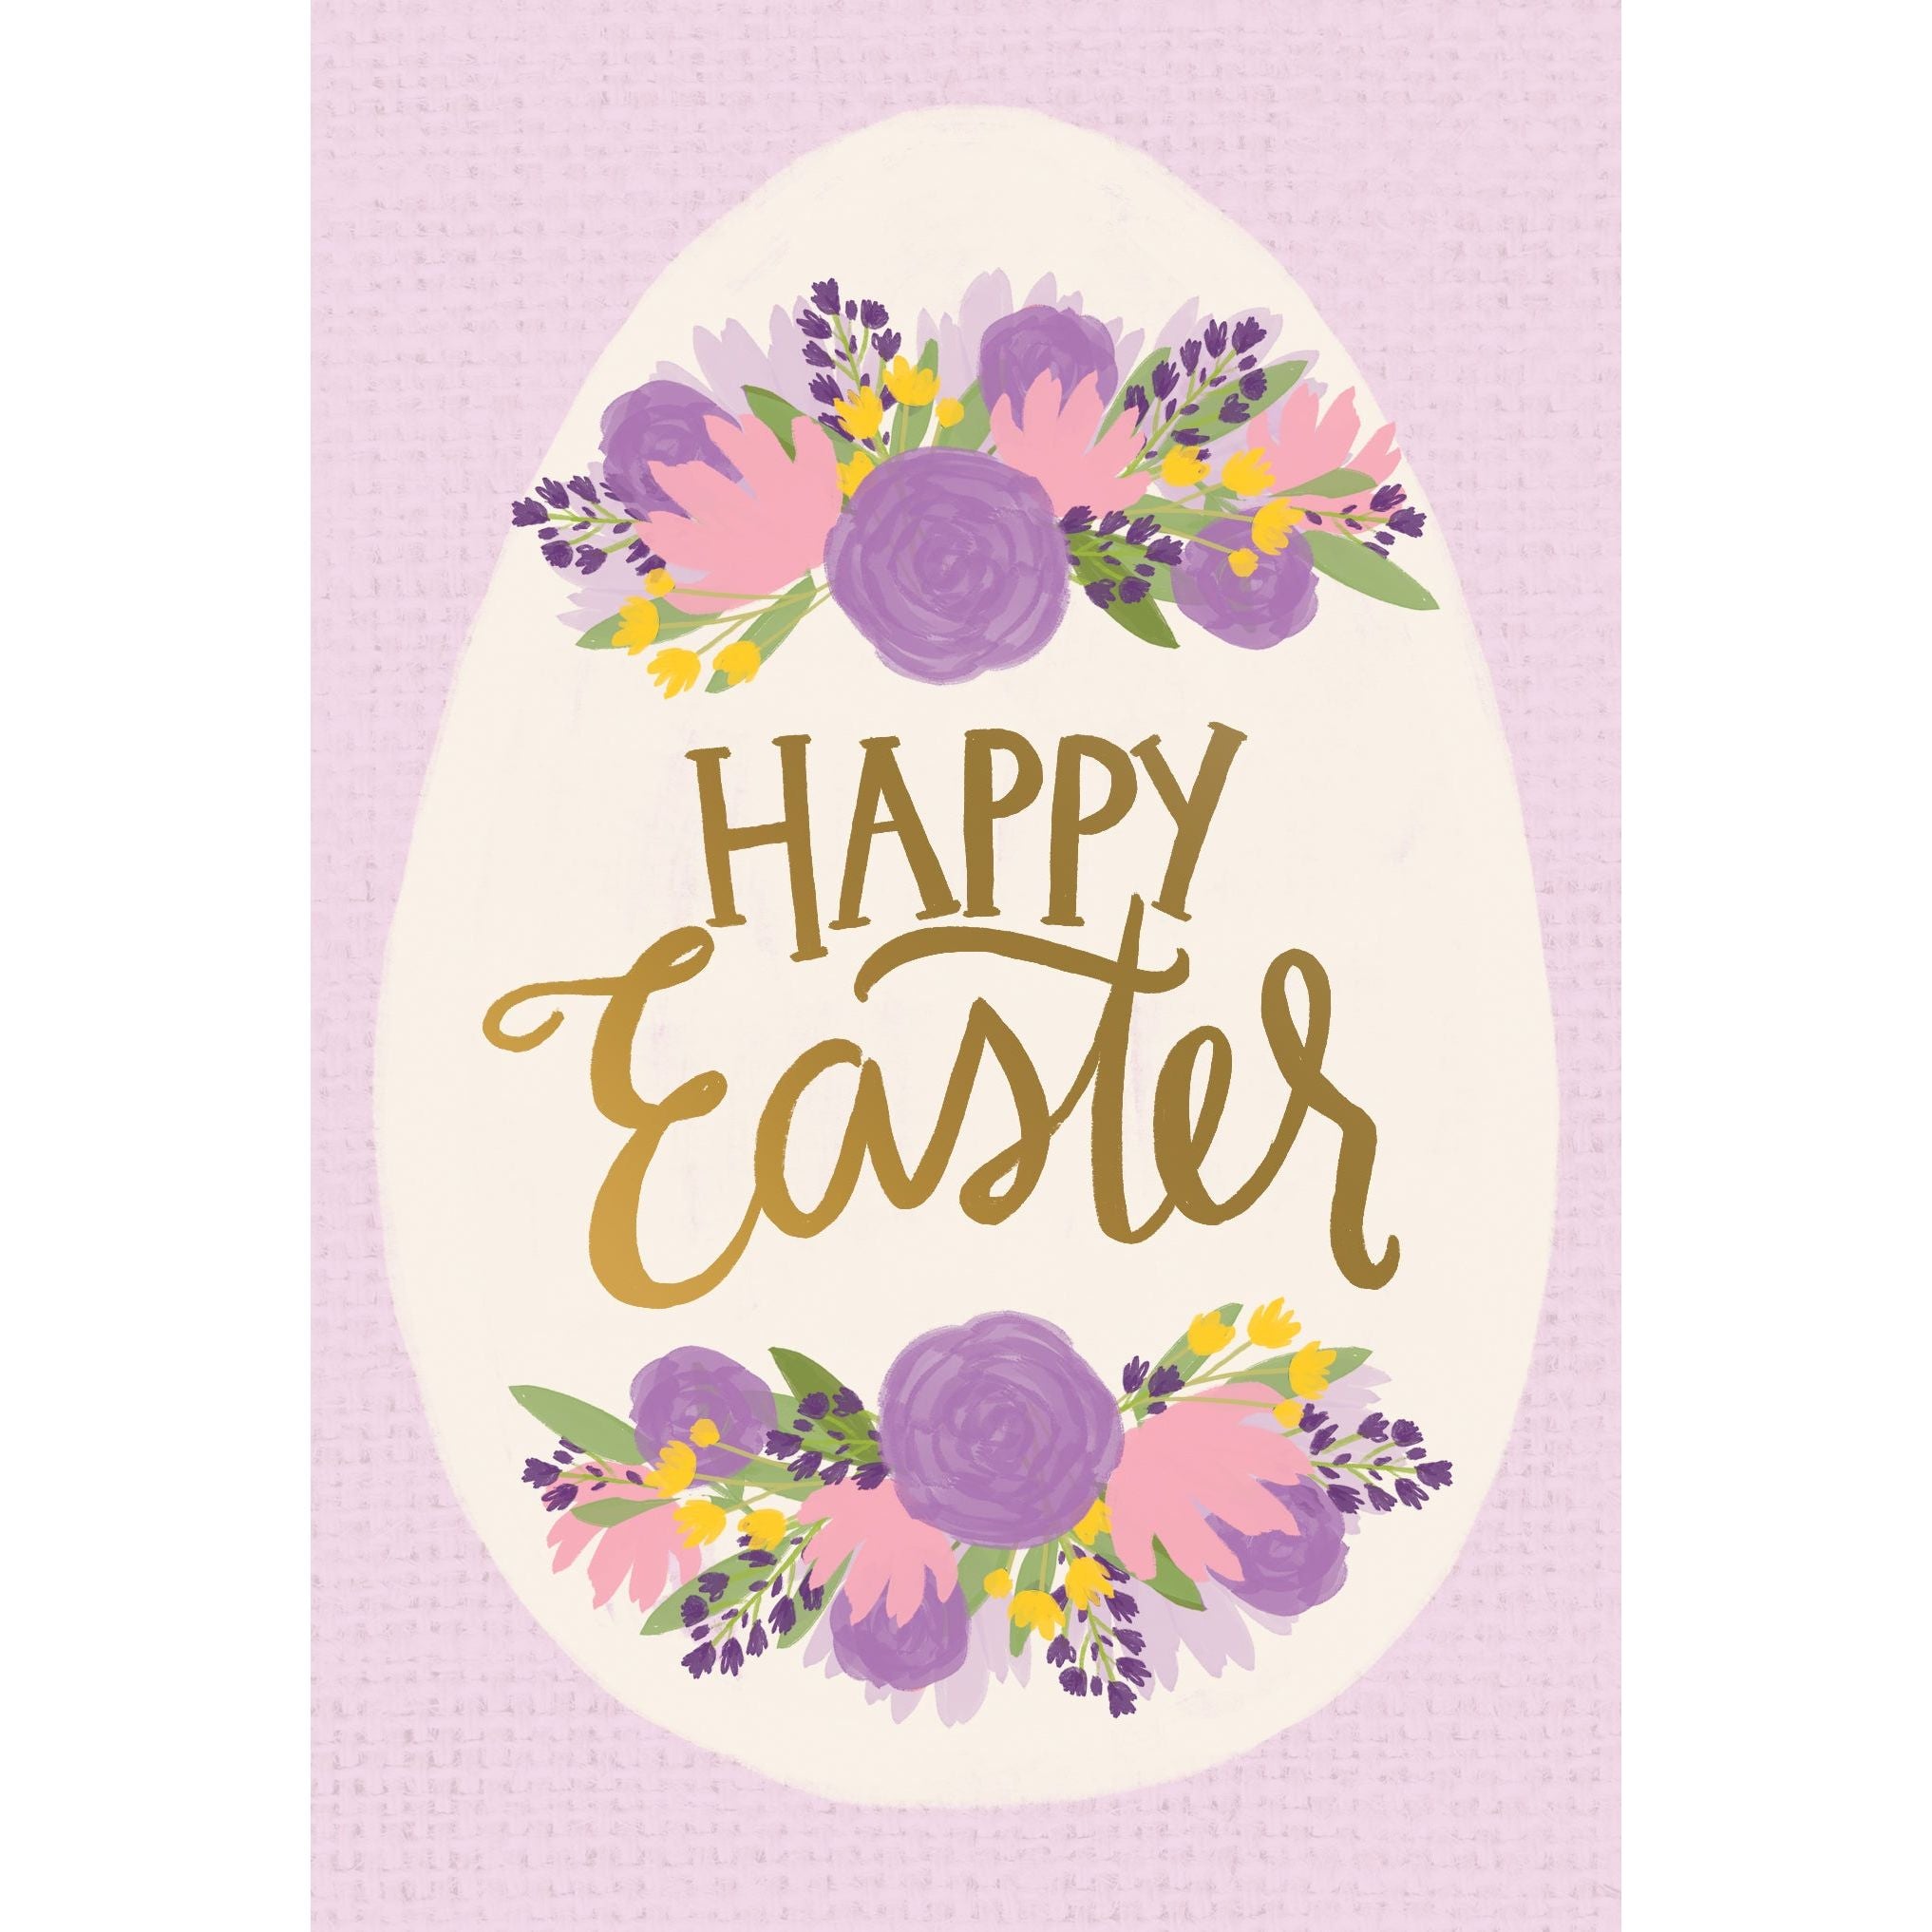 Free Printable Easter Card Designs, Download Now